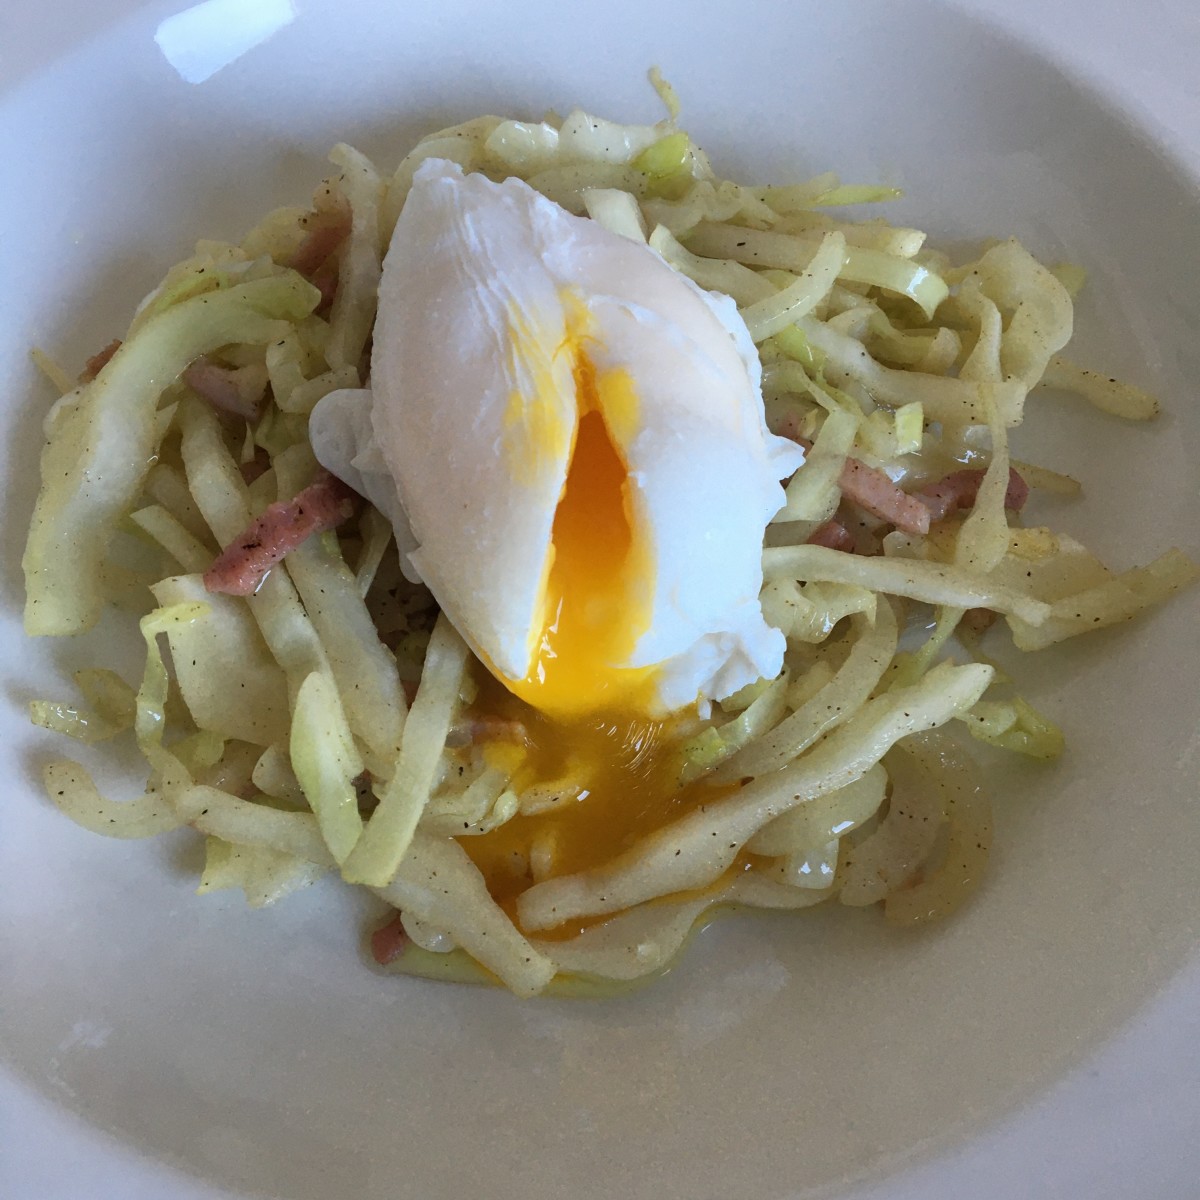 Poached duck egg on stir fried cabbage and bacon